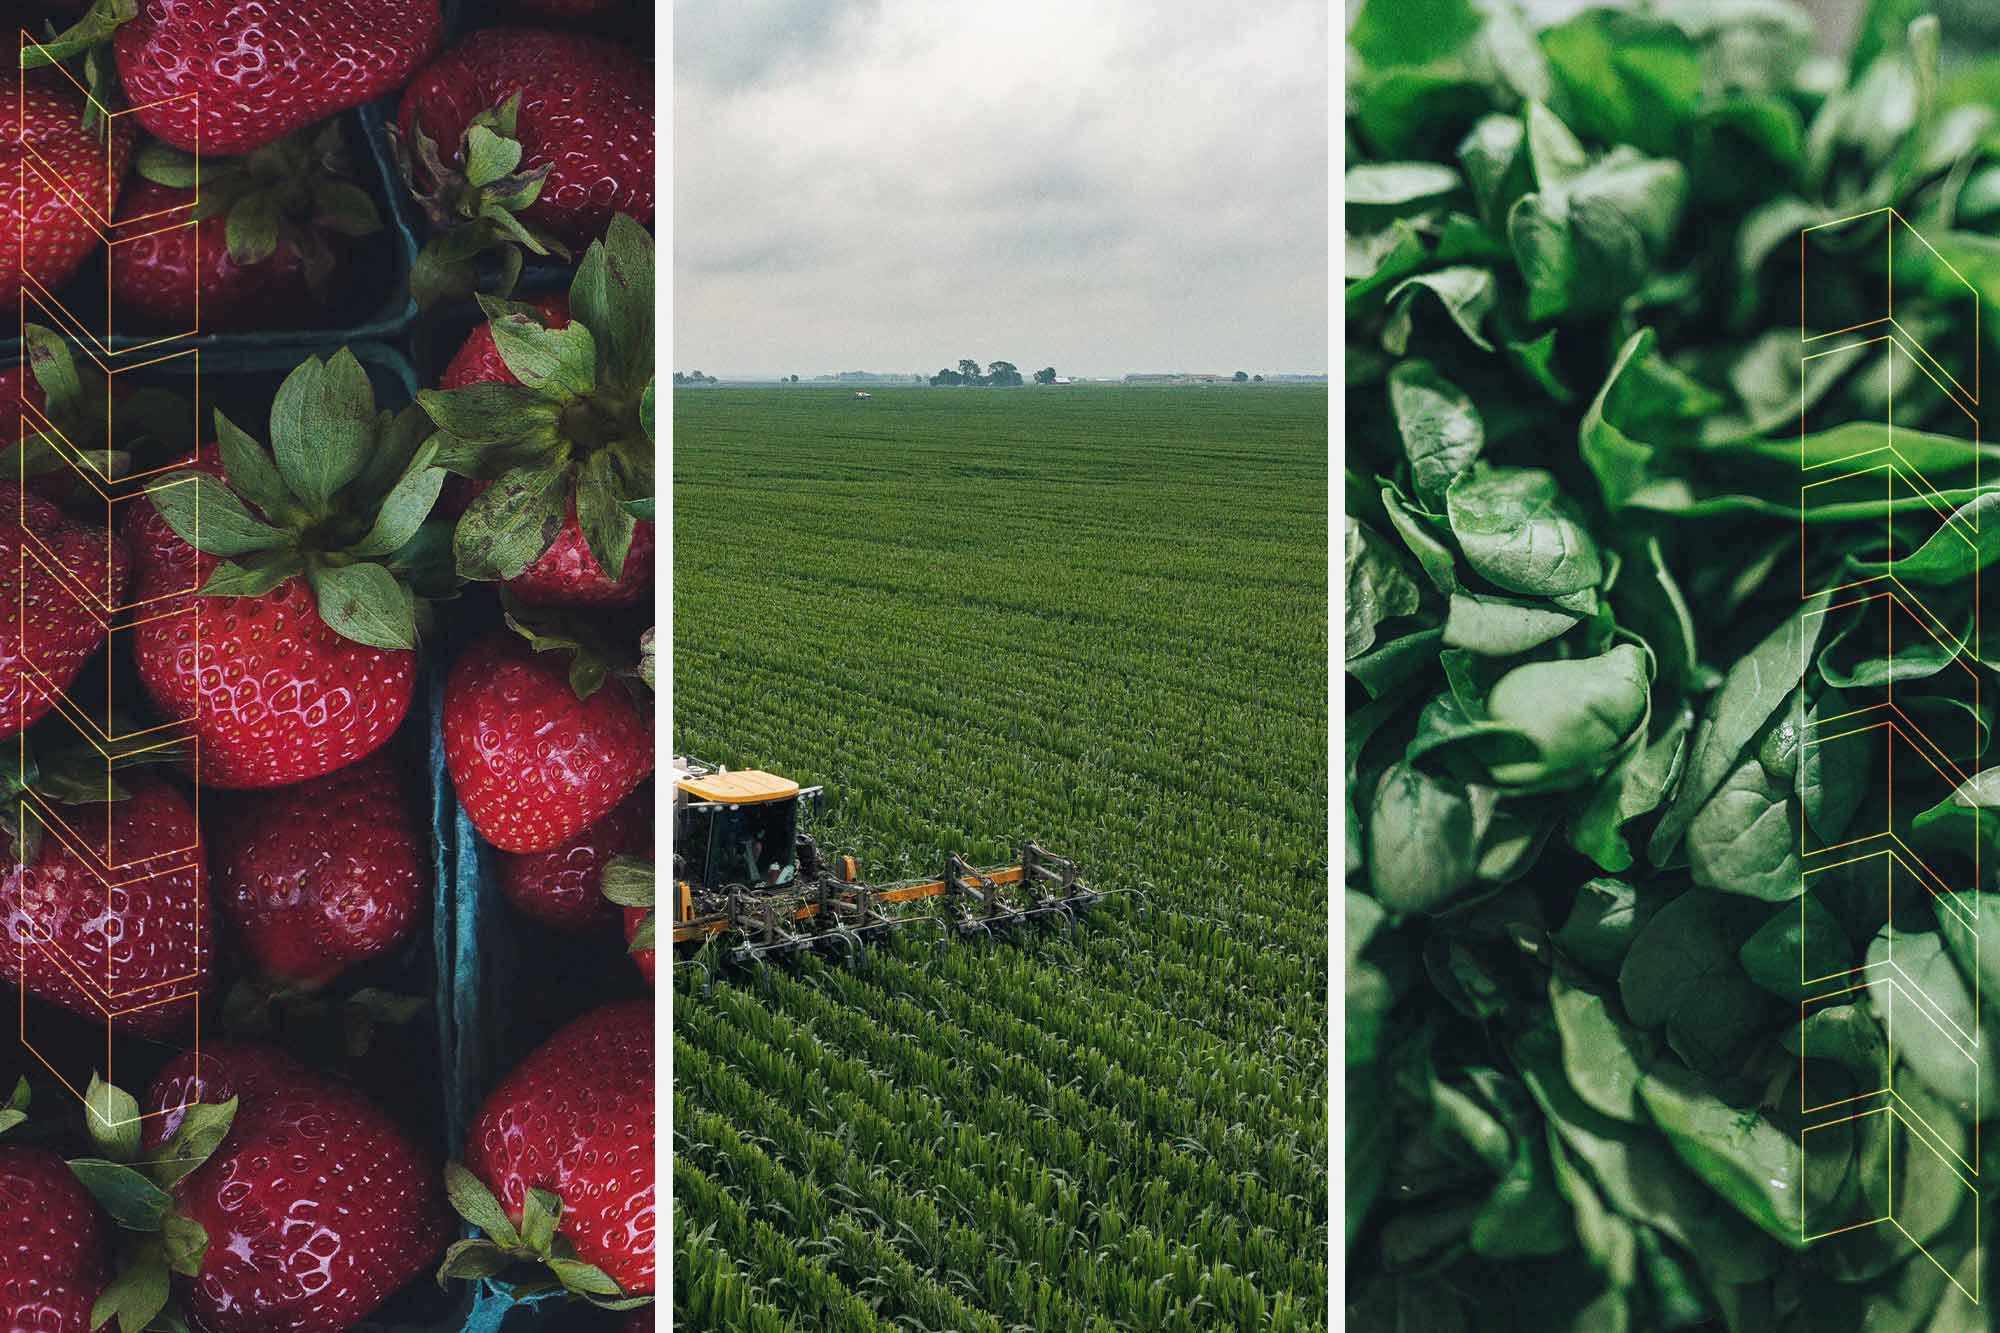 Left: Picked Strawberries in a pile Center: Farm equipment working in a field Right: Green plants growing